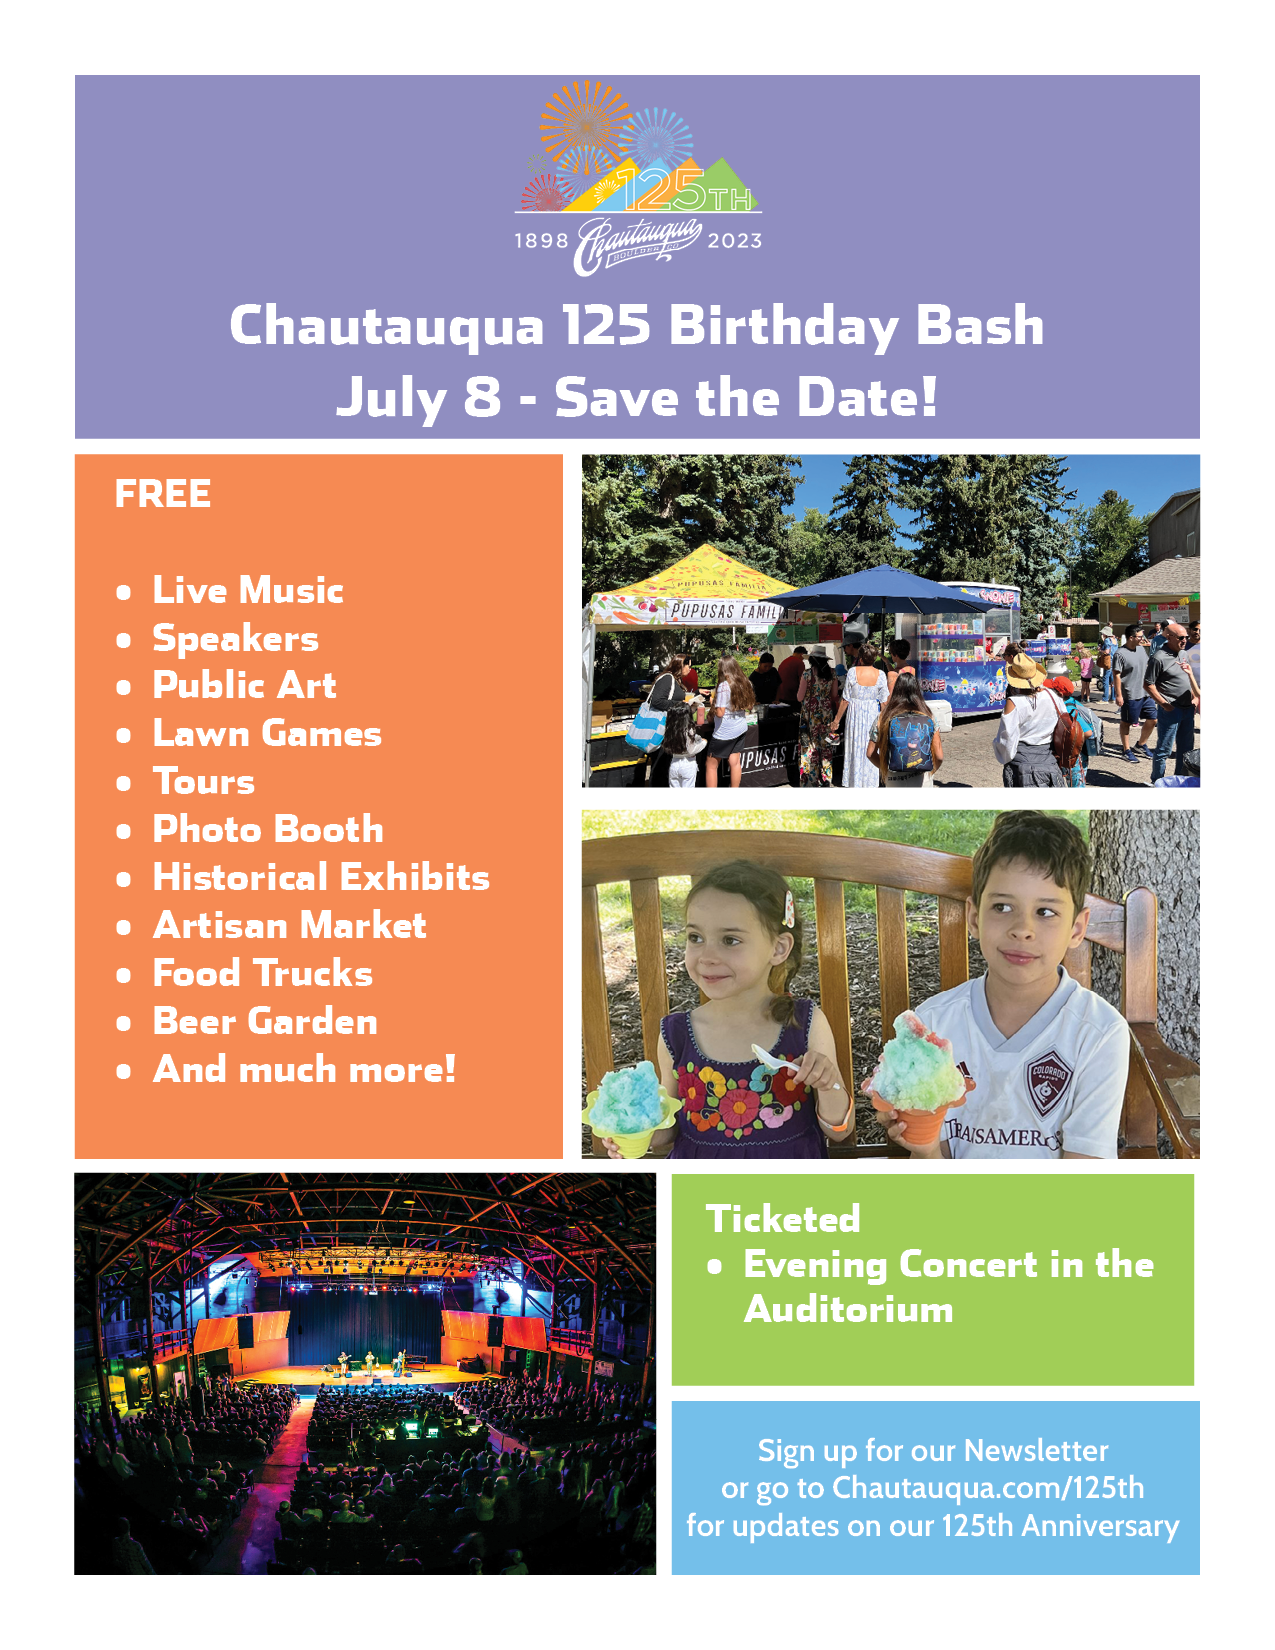 Chautauqua 125 Birthday Bash July 8 - Save the Date!FREE</p>
<p>Live Music<br />
Speakers<br />
Public Art<br />
Lawn Games<br />
Tours<br />
Photo Booth<br />
Historical Exhibits<br />
Artisan Market<br />
Food Trucks<br />
Beer Garden<br />
And much more! Ticketed<br />
Evening Concert in the Auditorium Sign up for our Newsletter<br />
or go to Chautauqua.com/125th<br />
for updates on our 125th Anniversary 